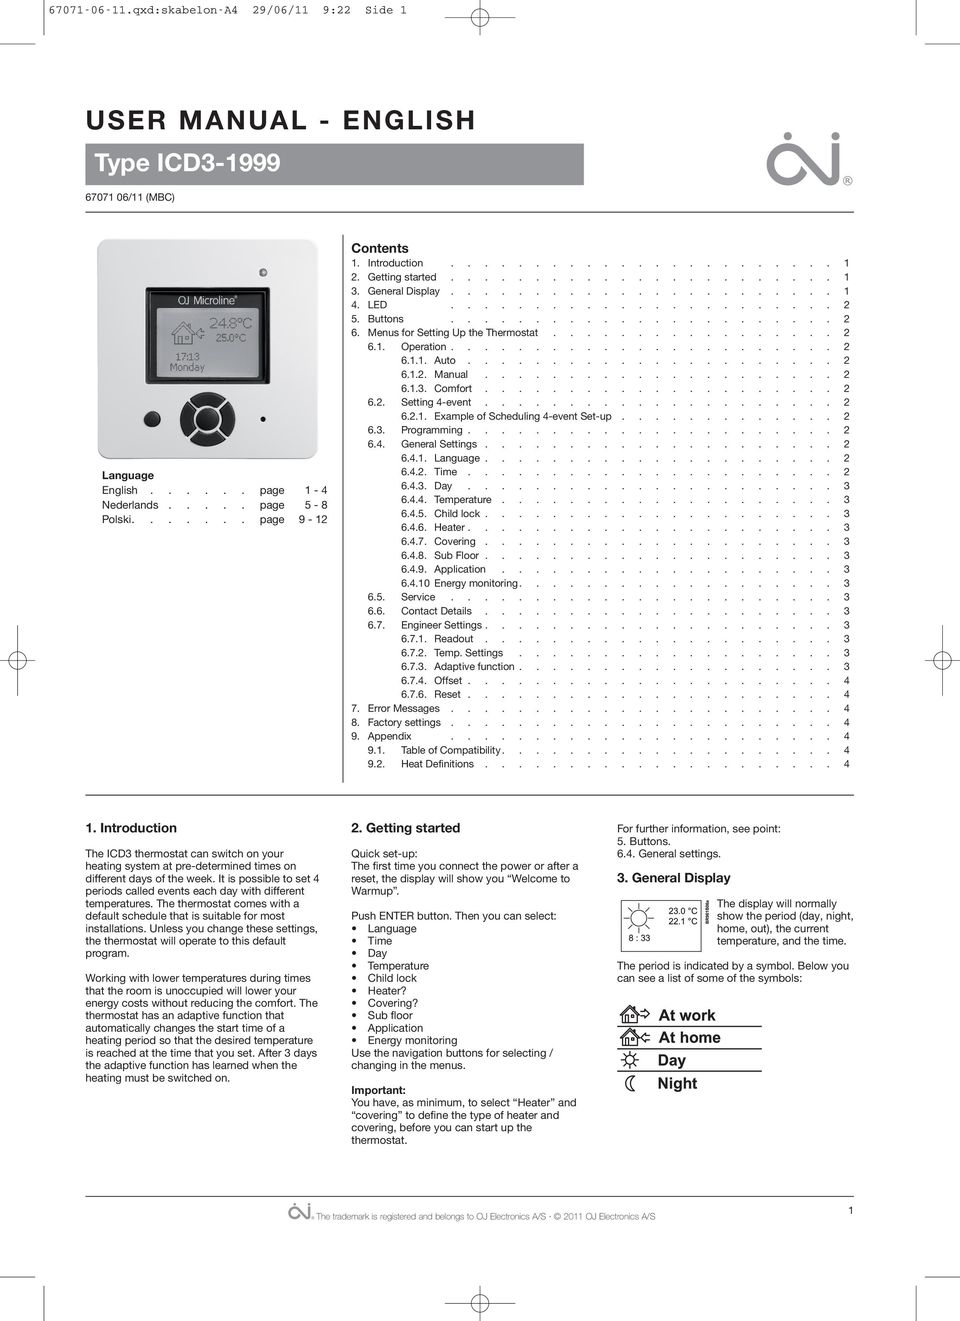 Menus for Setting Up the Thermostat................. 2 6.1. Operation....................... 2 6.1.1. Auto...................... 2 6.1.2. Manual..................... 2 6.1.3. Comfort..................... 2 6.2. Setting 4-event.